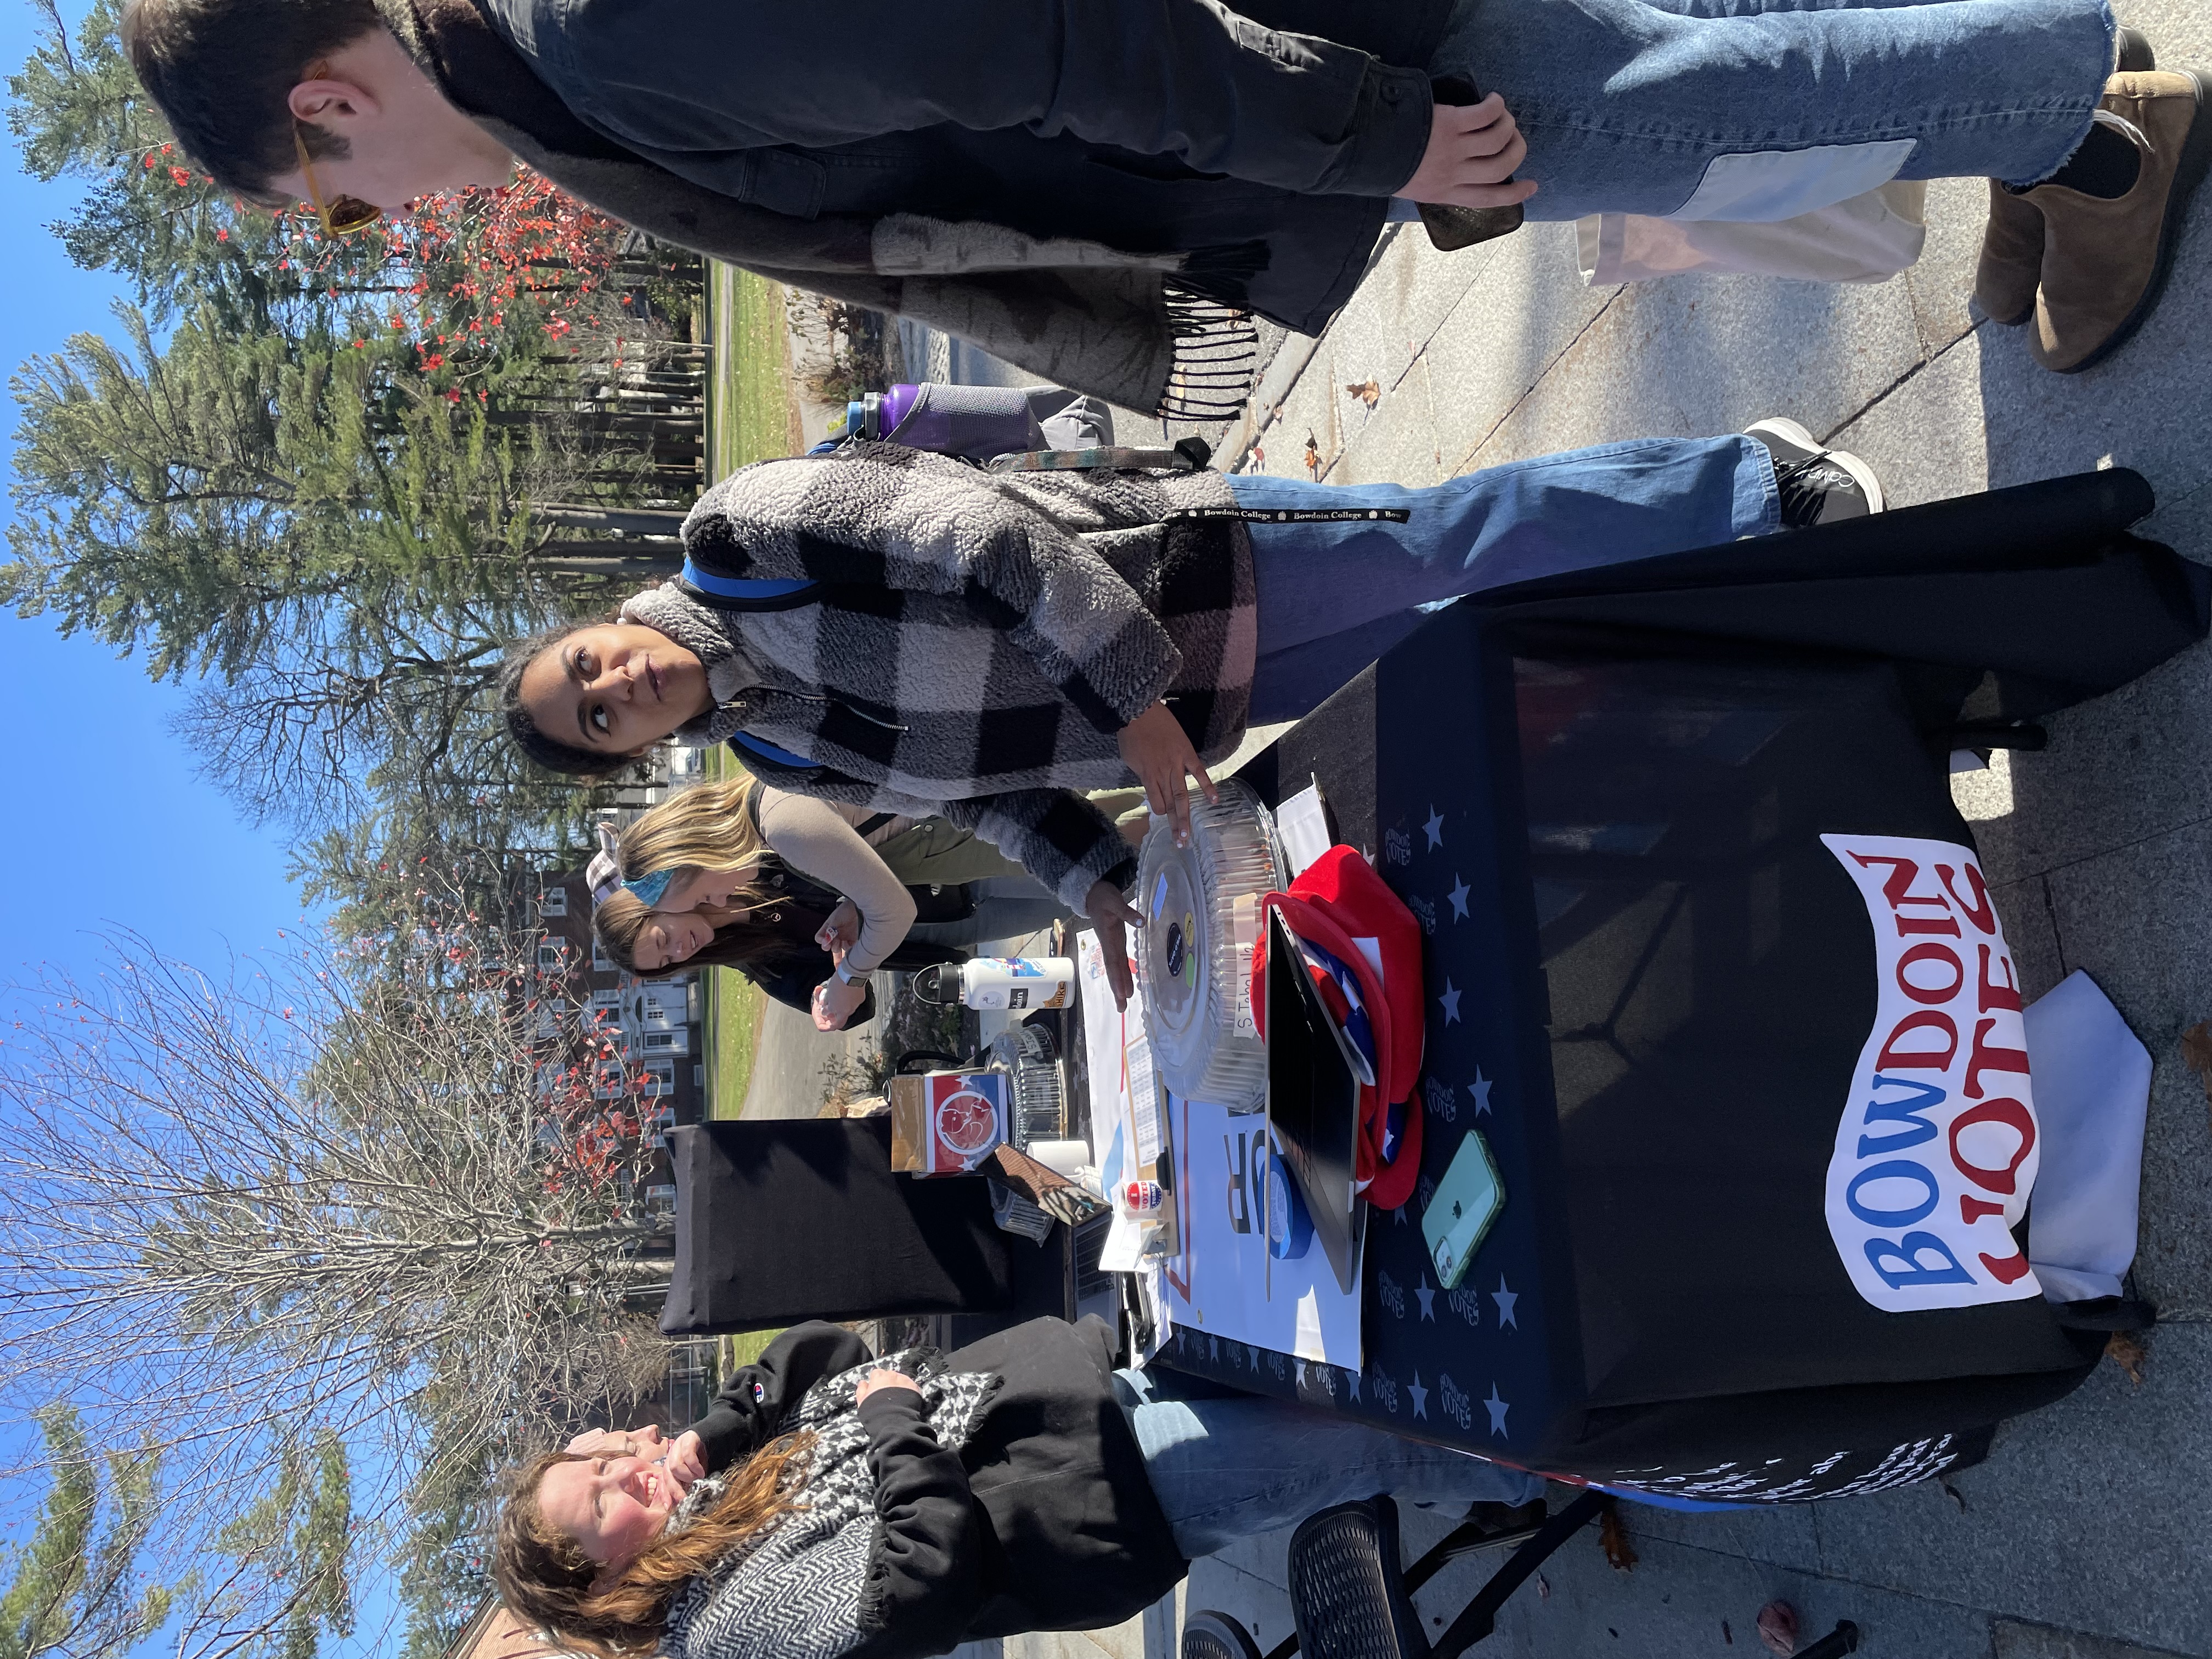 Students tabling outside the McKeen Center